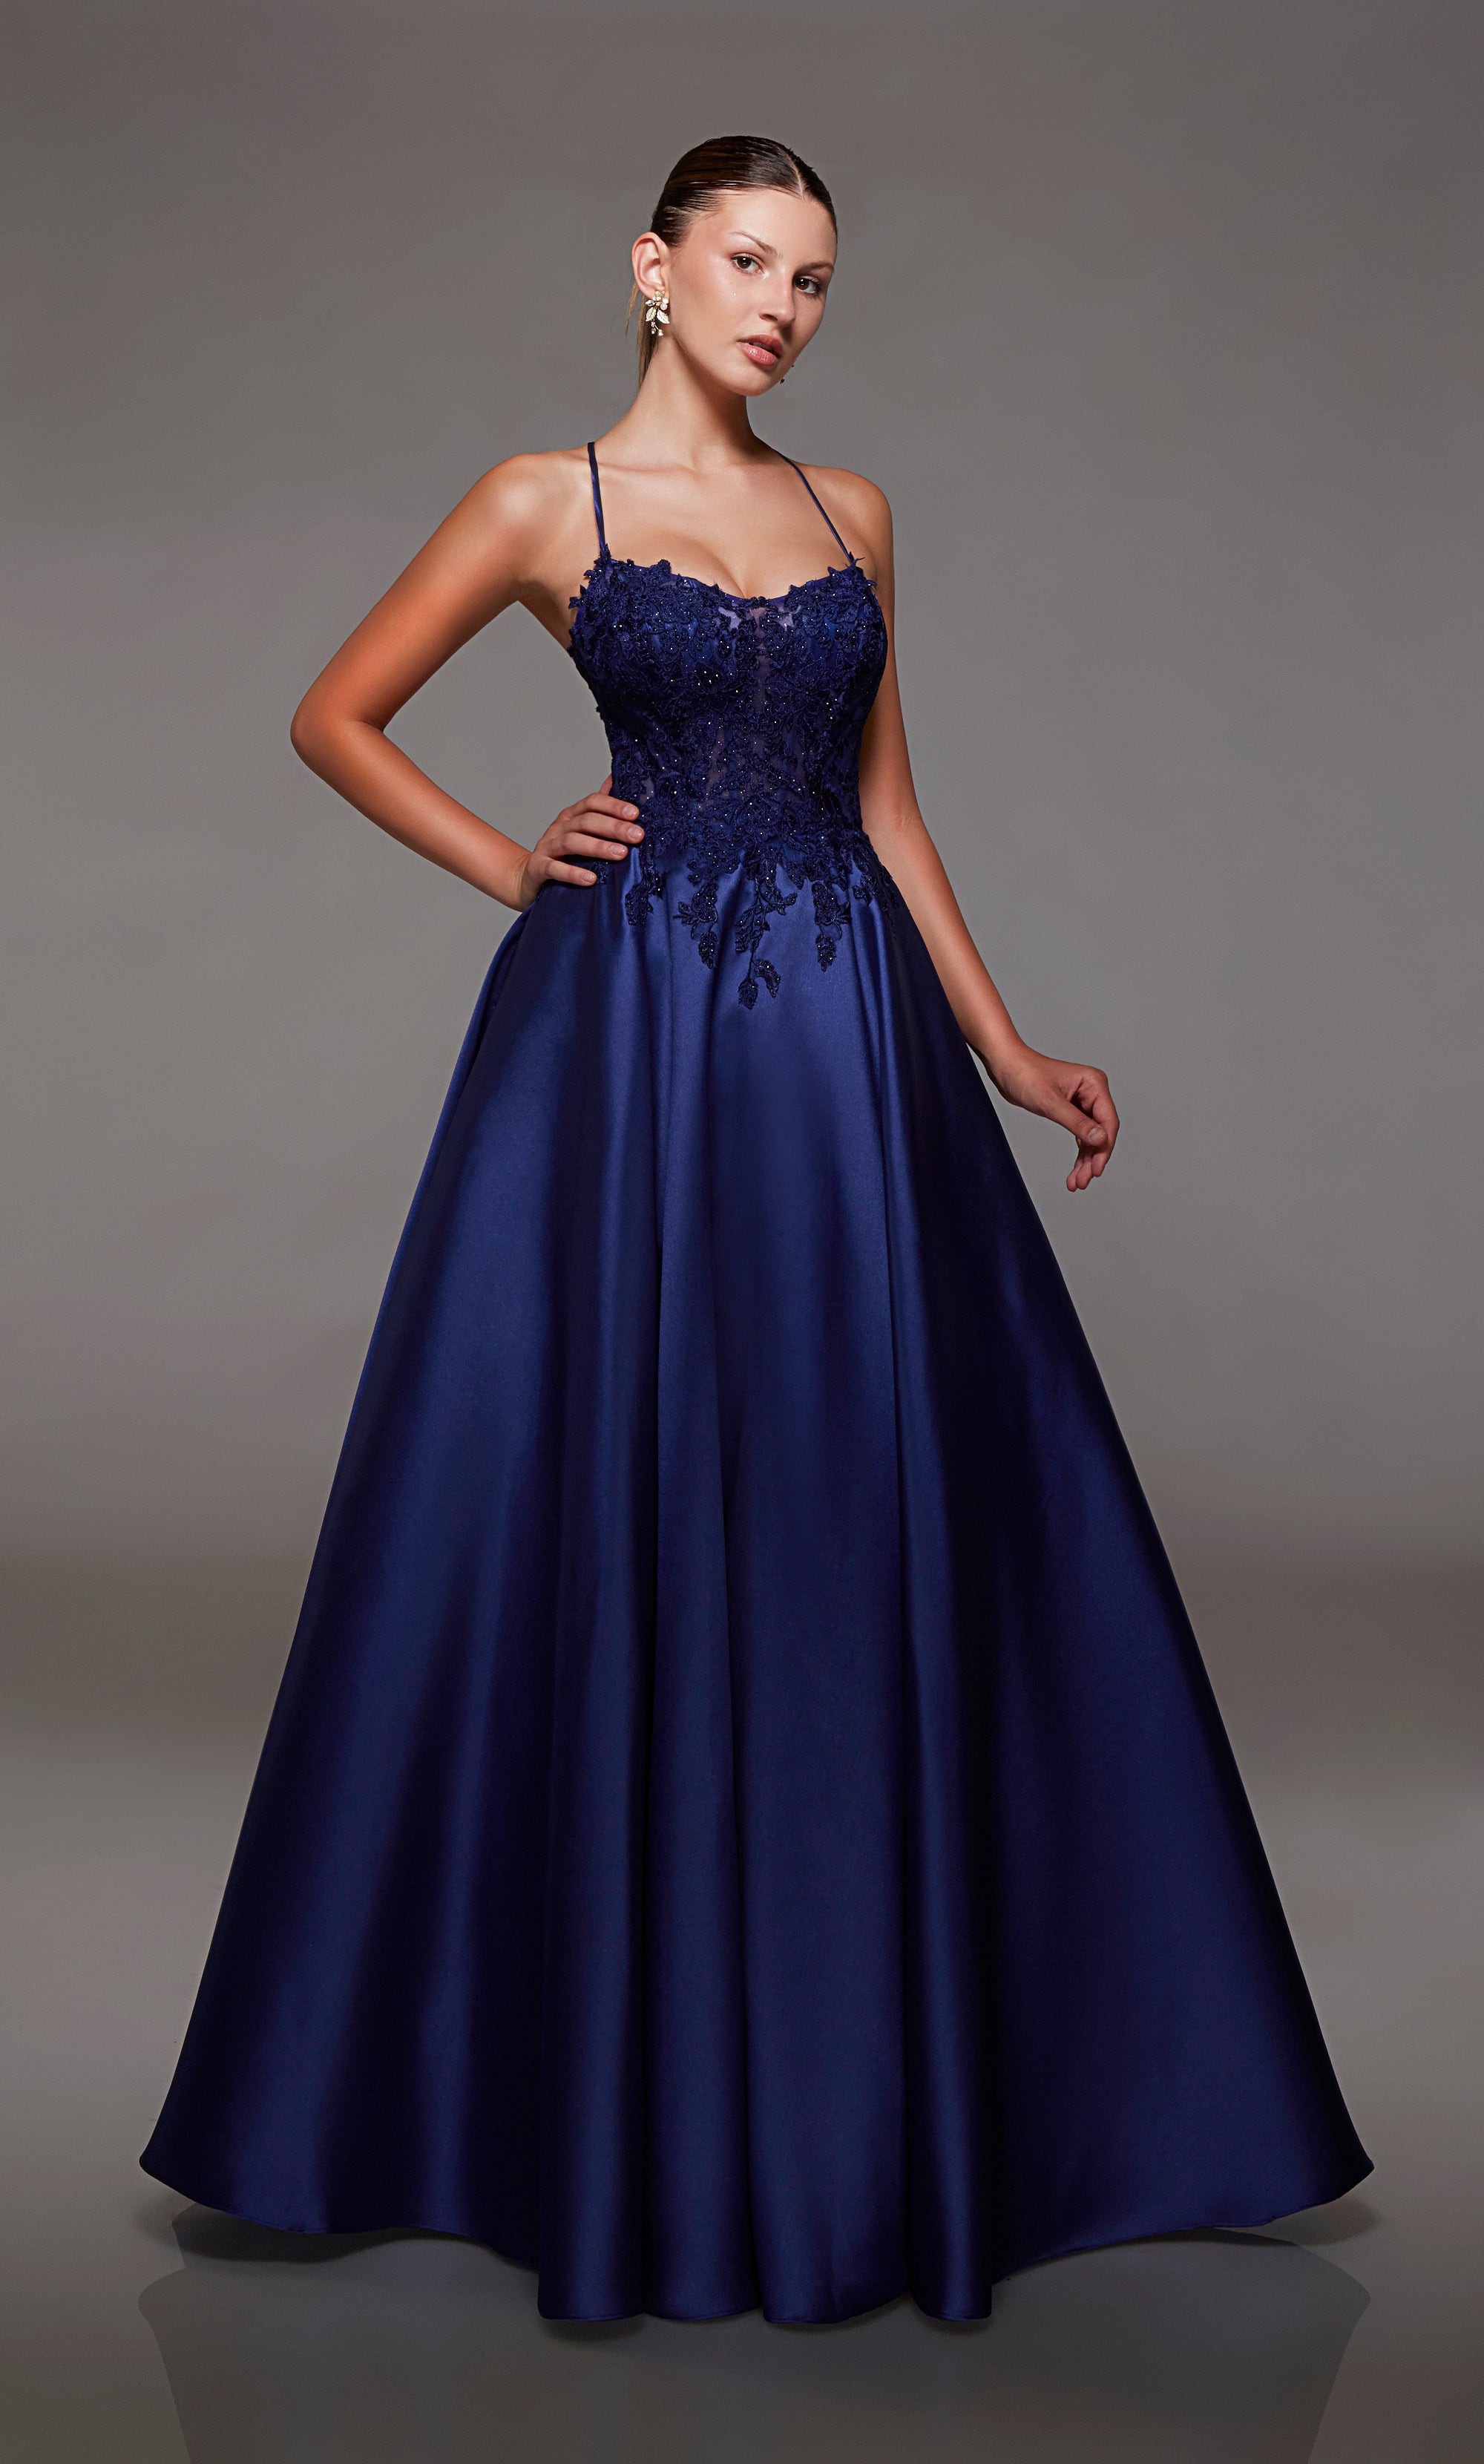 Navy mikado ball gown with lace corset, strappy back, and slight train for an stylish and vibrant look.